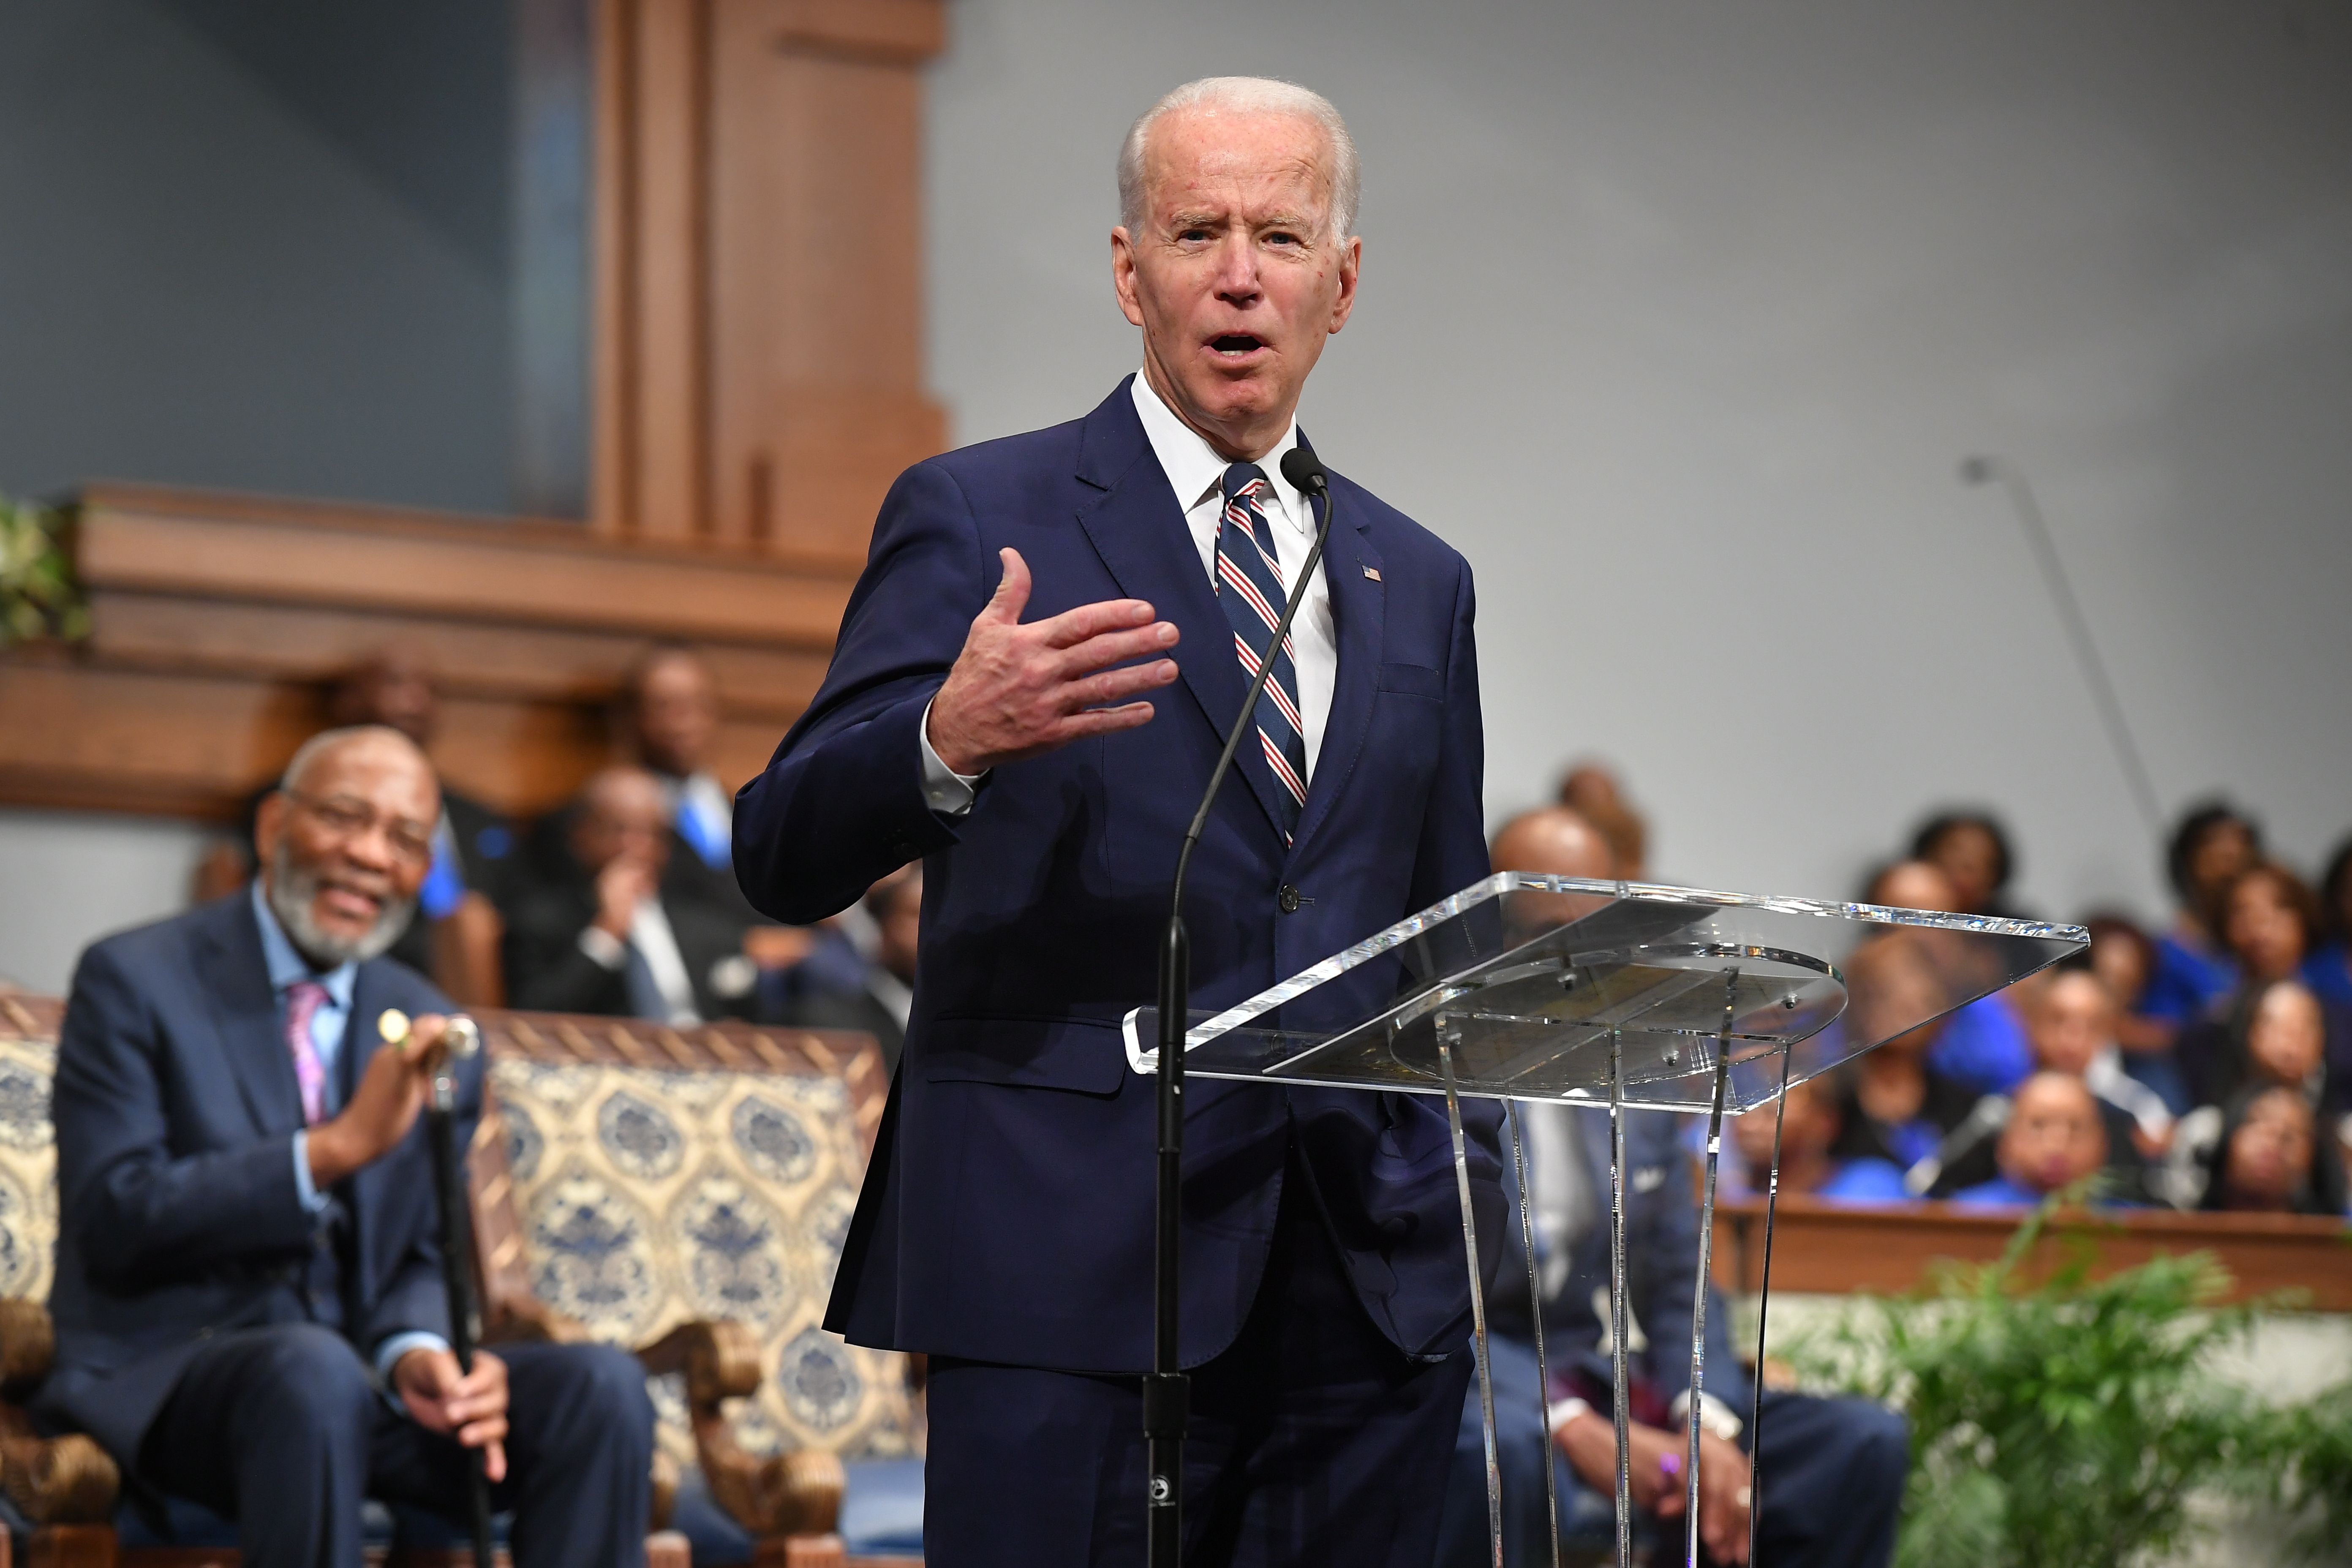 Democratic presidential candidate Joe Biden speaks as he attends Sunday service at the New Hope Baptist Church in Jackson, Mississippi on March 8, 2020. (MANDEL NGAN/AFP via Getty Images)